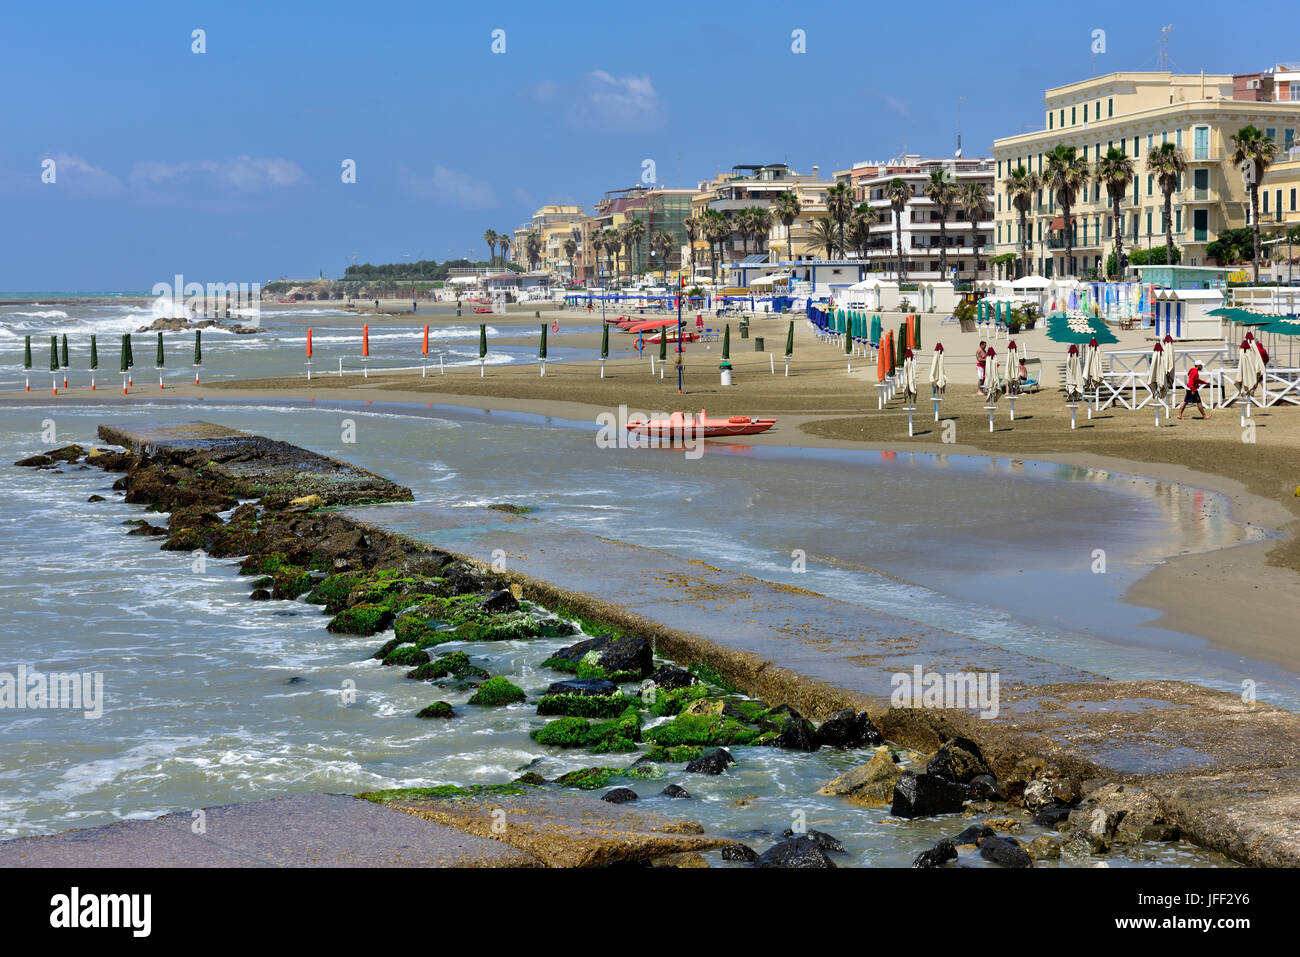 Nearly deserted beach with umbrellas and boats out on a windy summer day in Anzio, Italy Stock Photo